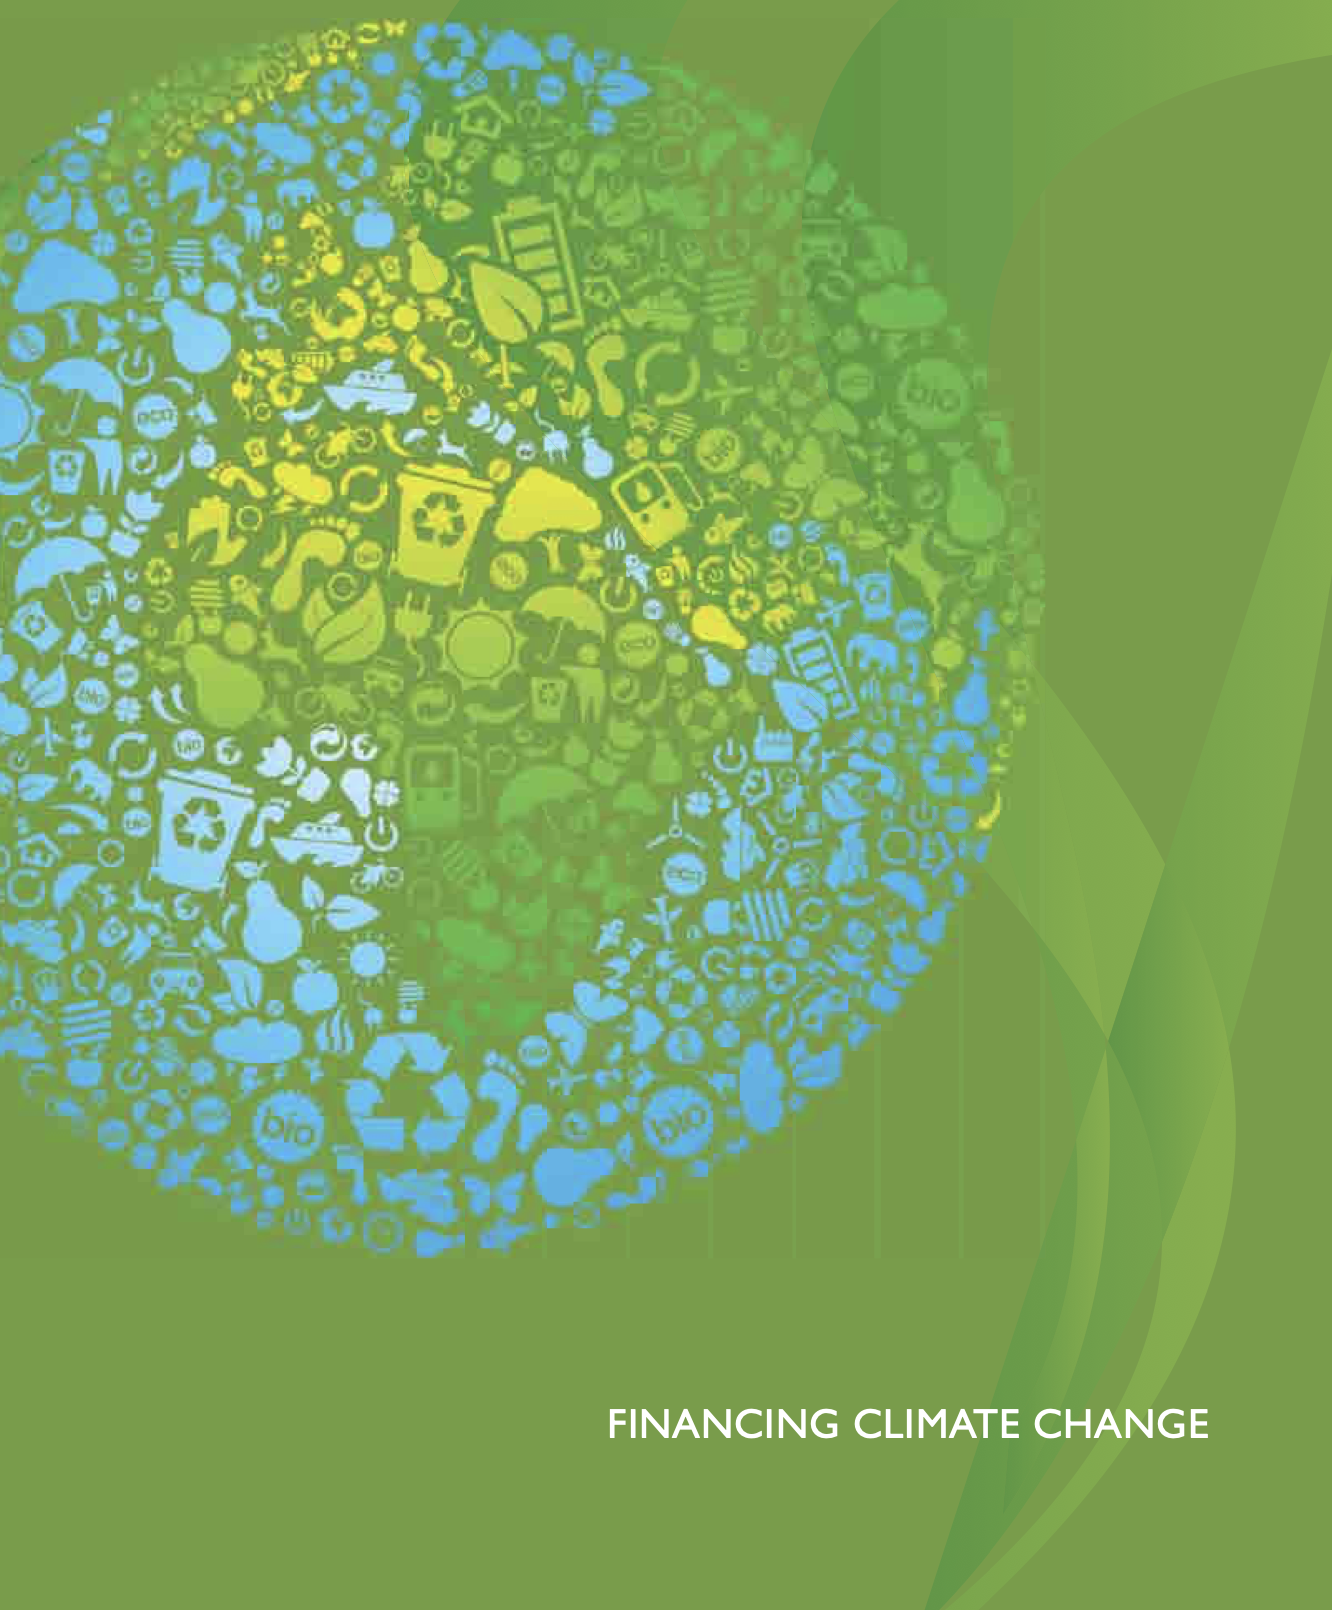 Financing climate change: Policy options for National Climate Change Response Policy for South Africa